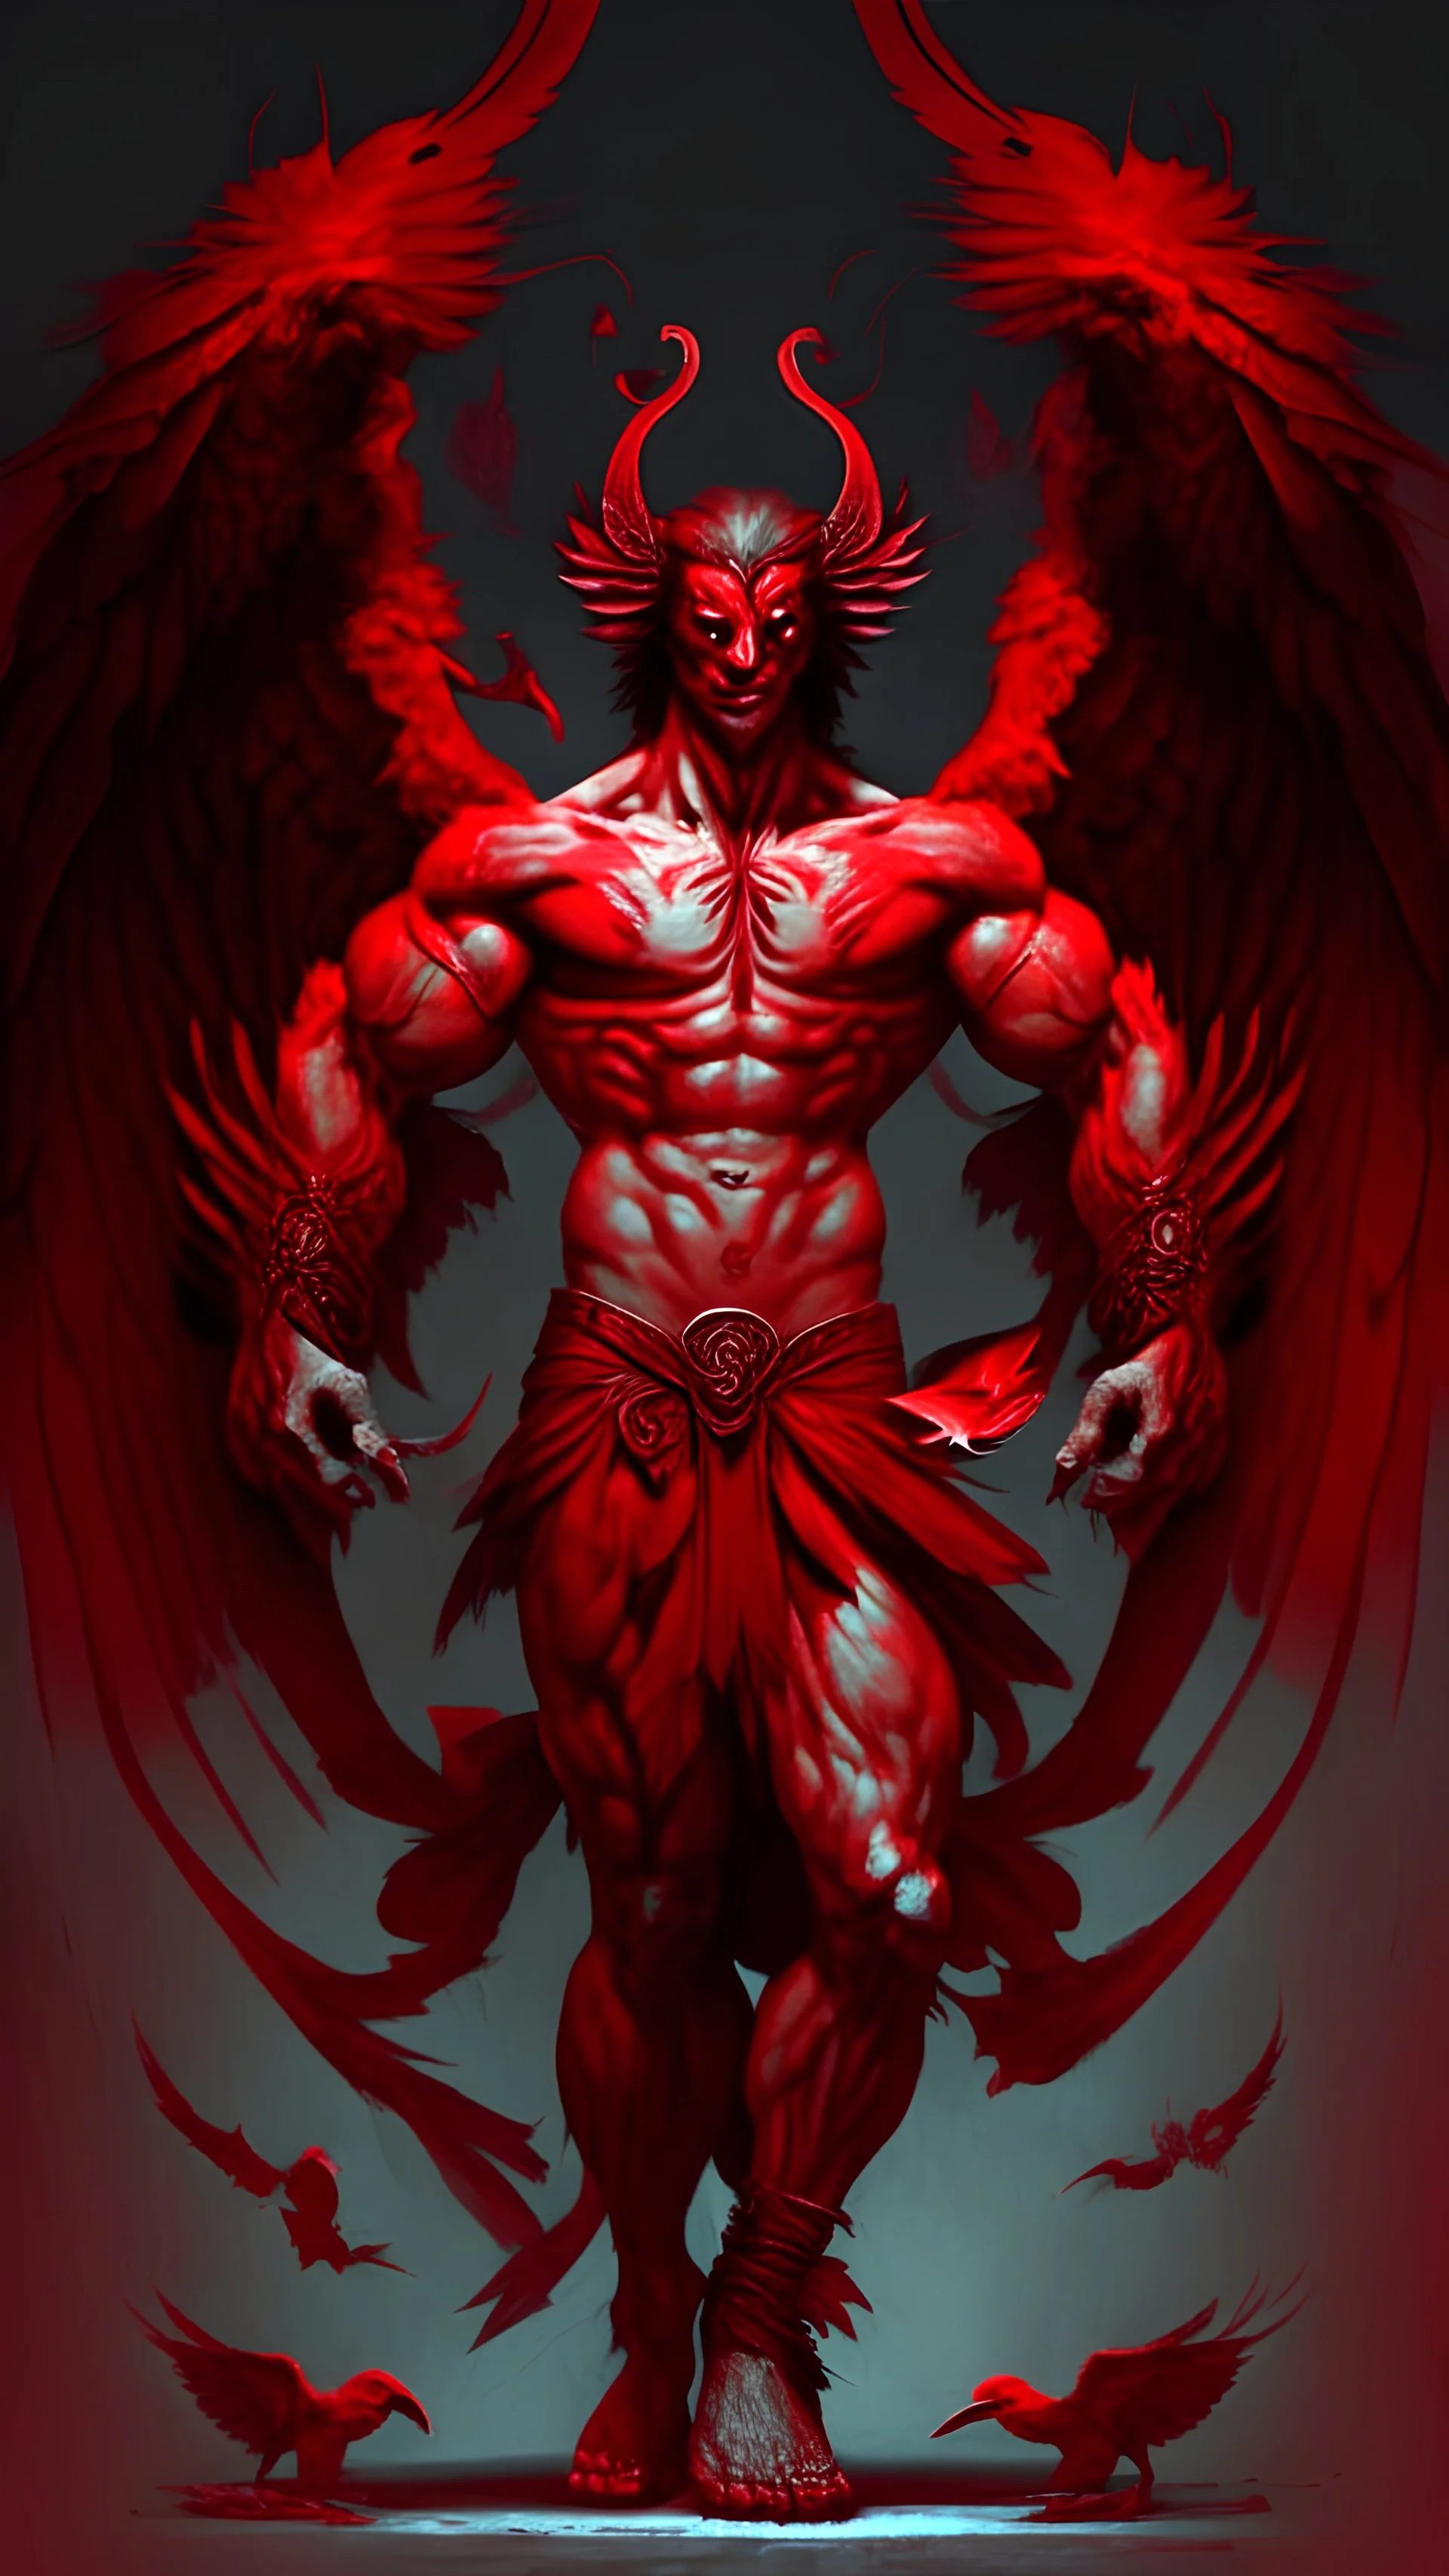 A demon in red with wings and muscles holding an eagle in his hand